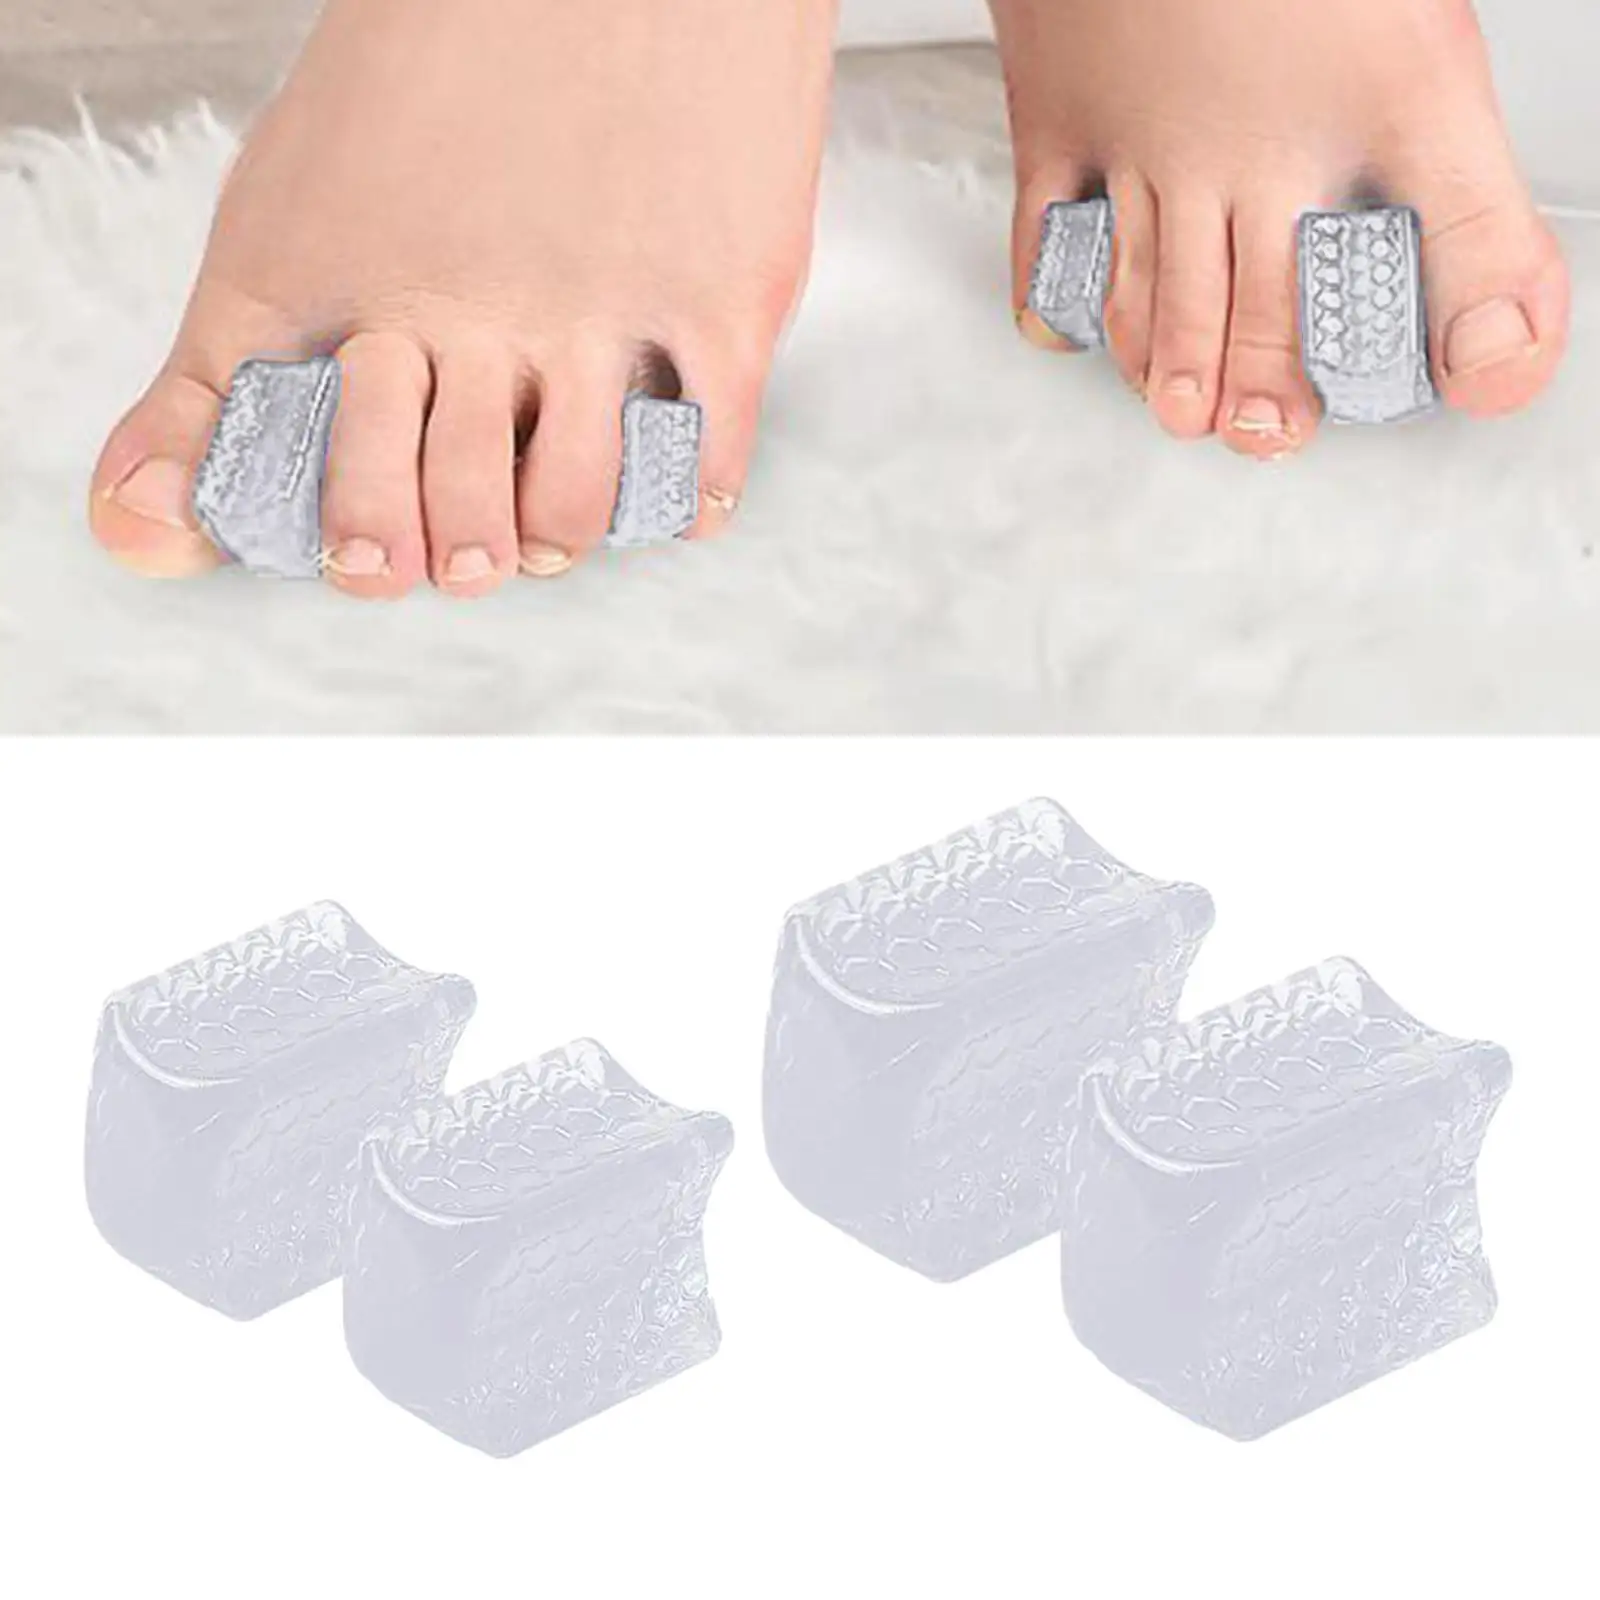 4x Toe Separators Corrector Straightener Separate Curled Overlapping Toe for Women Men Washable Reusable Preventing Rubbing